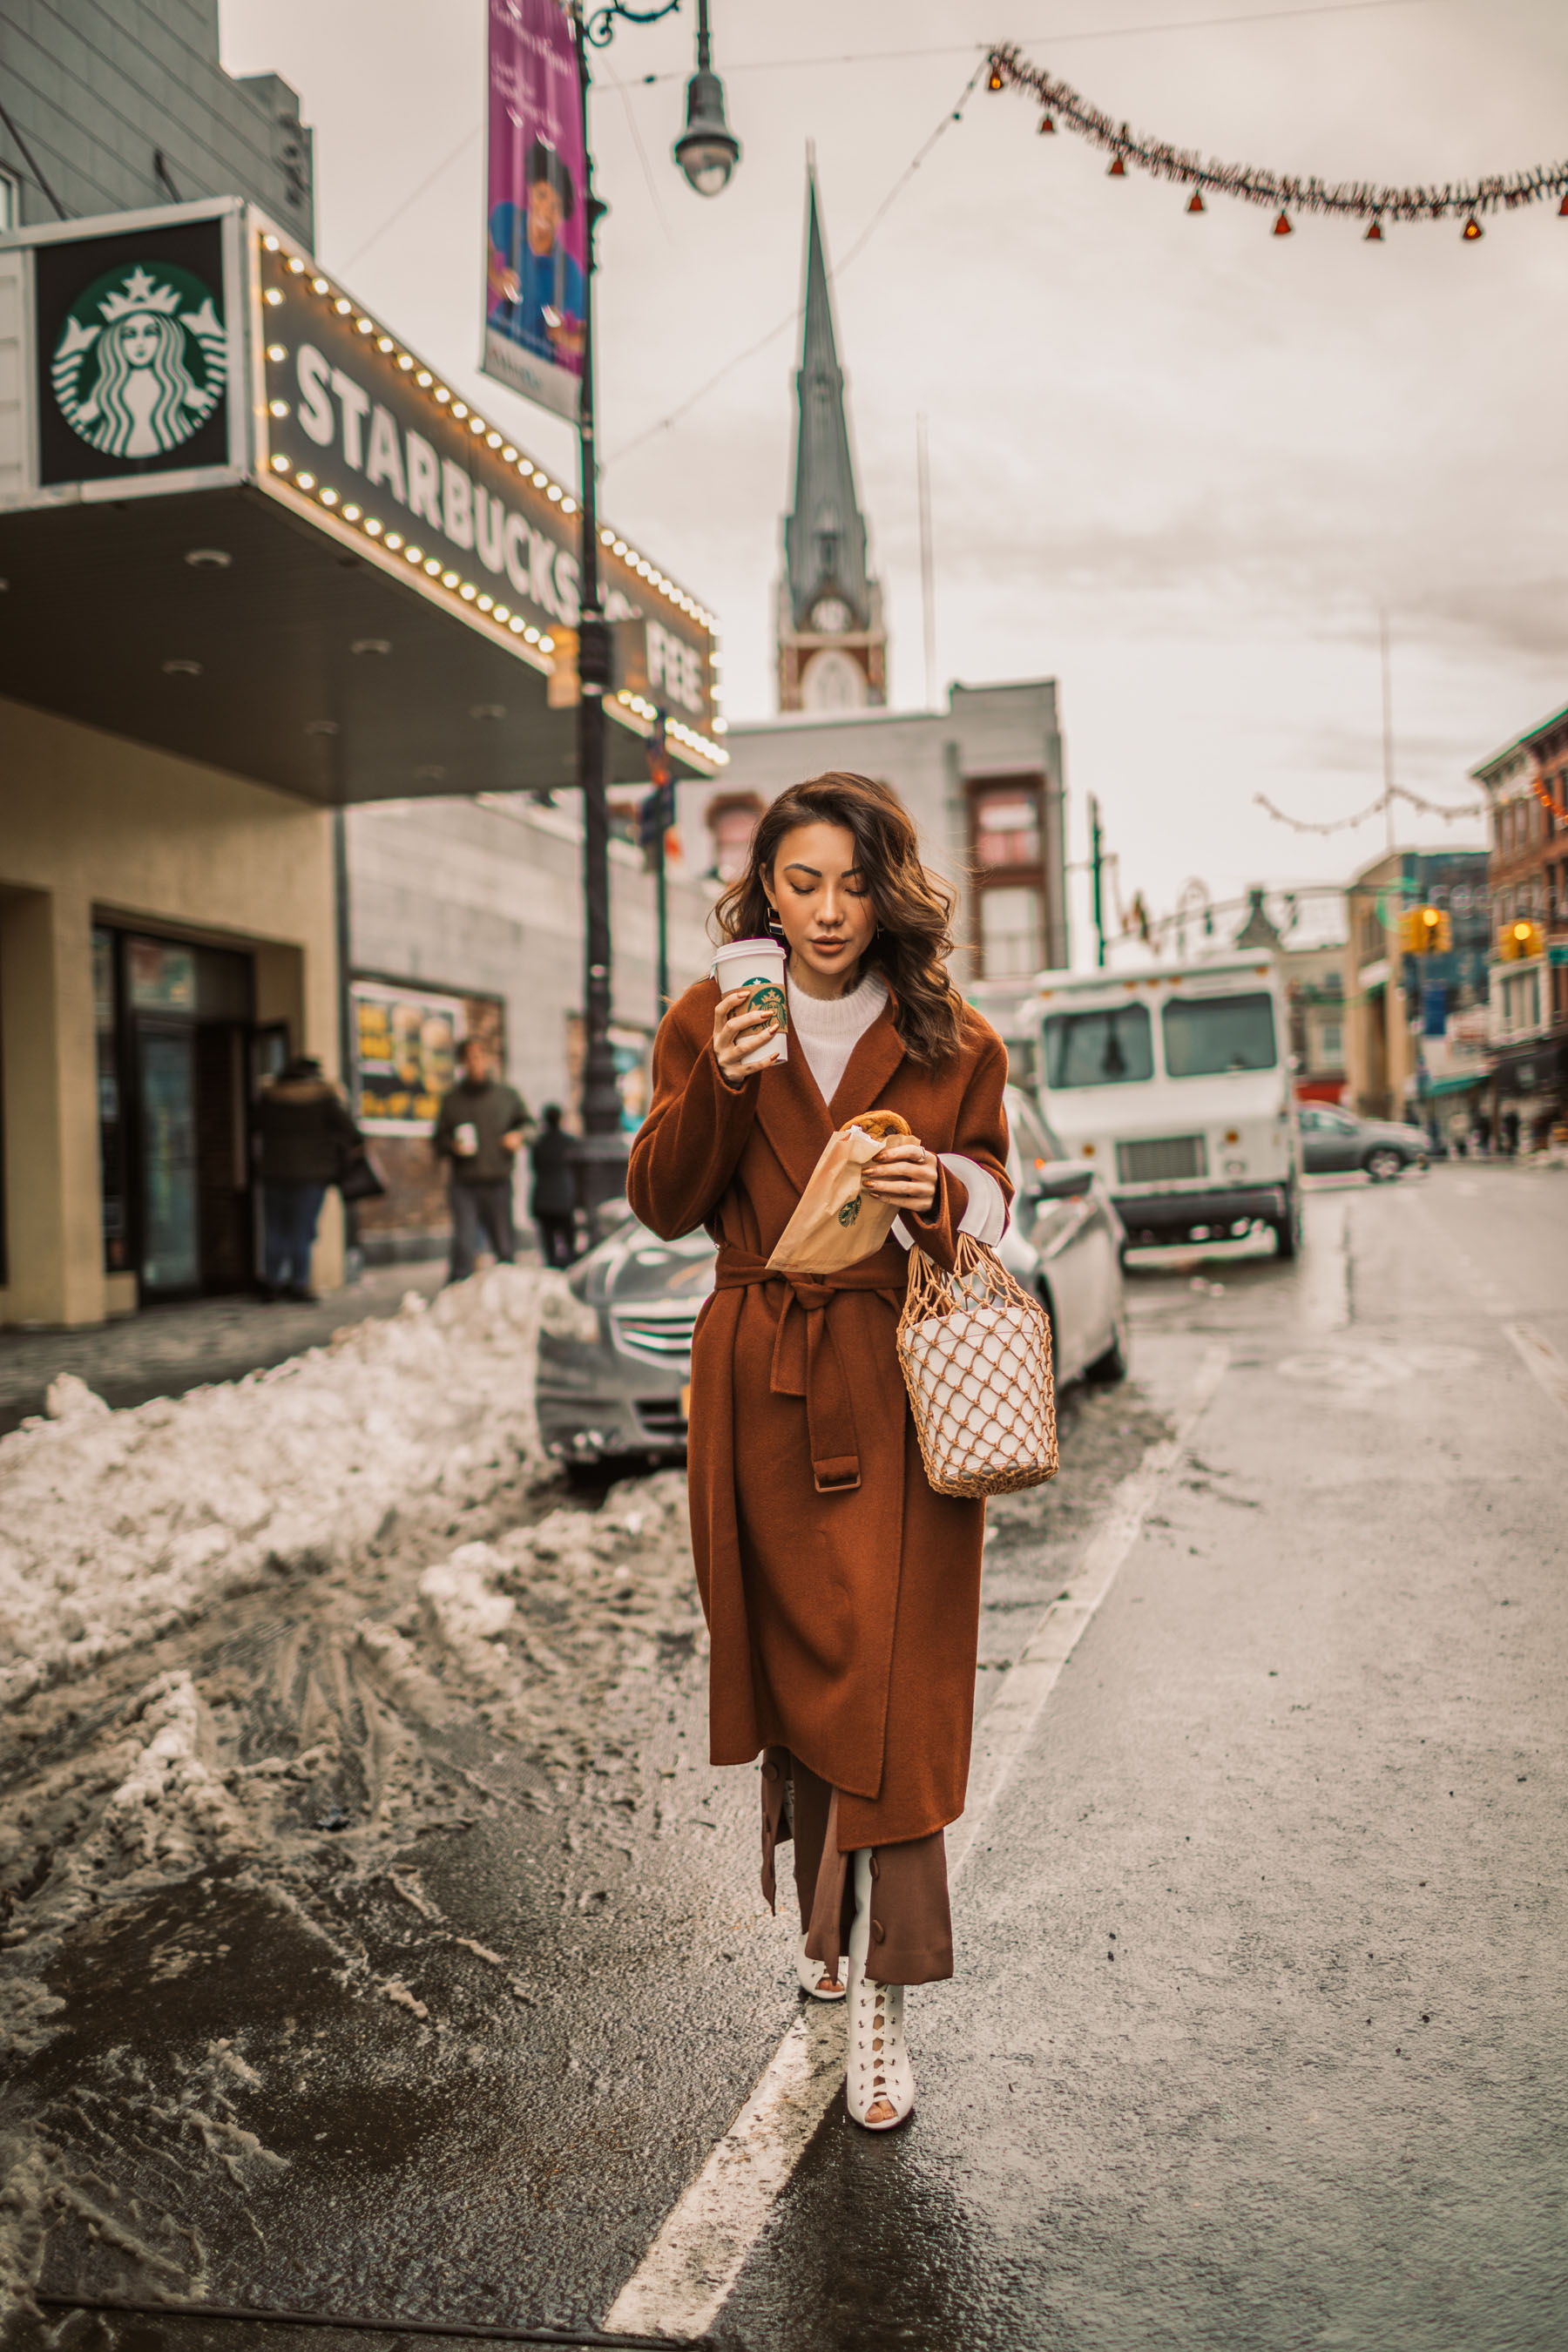 Up and Coming Handbag Brands to Know in 2018 // Notjessfashion.com // staud macrame bag, brown button trousers, wrap coat, robe coat, chic winter outfit, new york fashion blogger